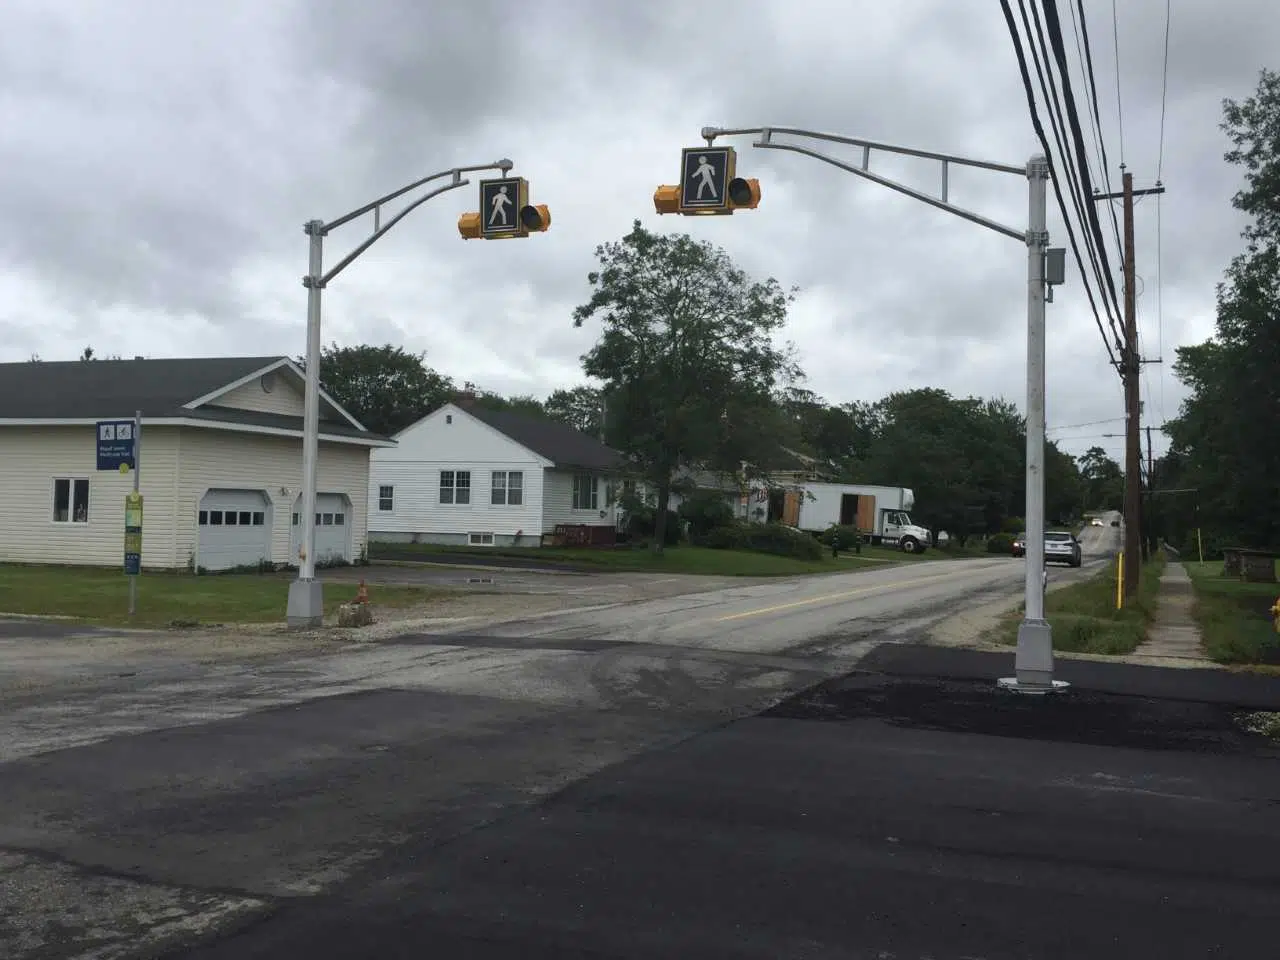 Yarmouth: Clements Avenue Project Nearing Completion, New Crosswalk Almost Ready